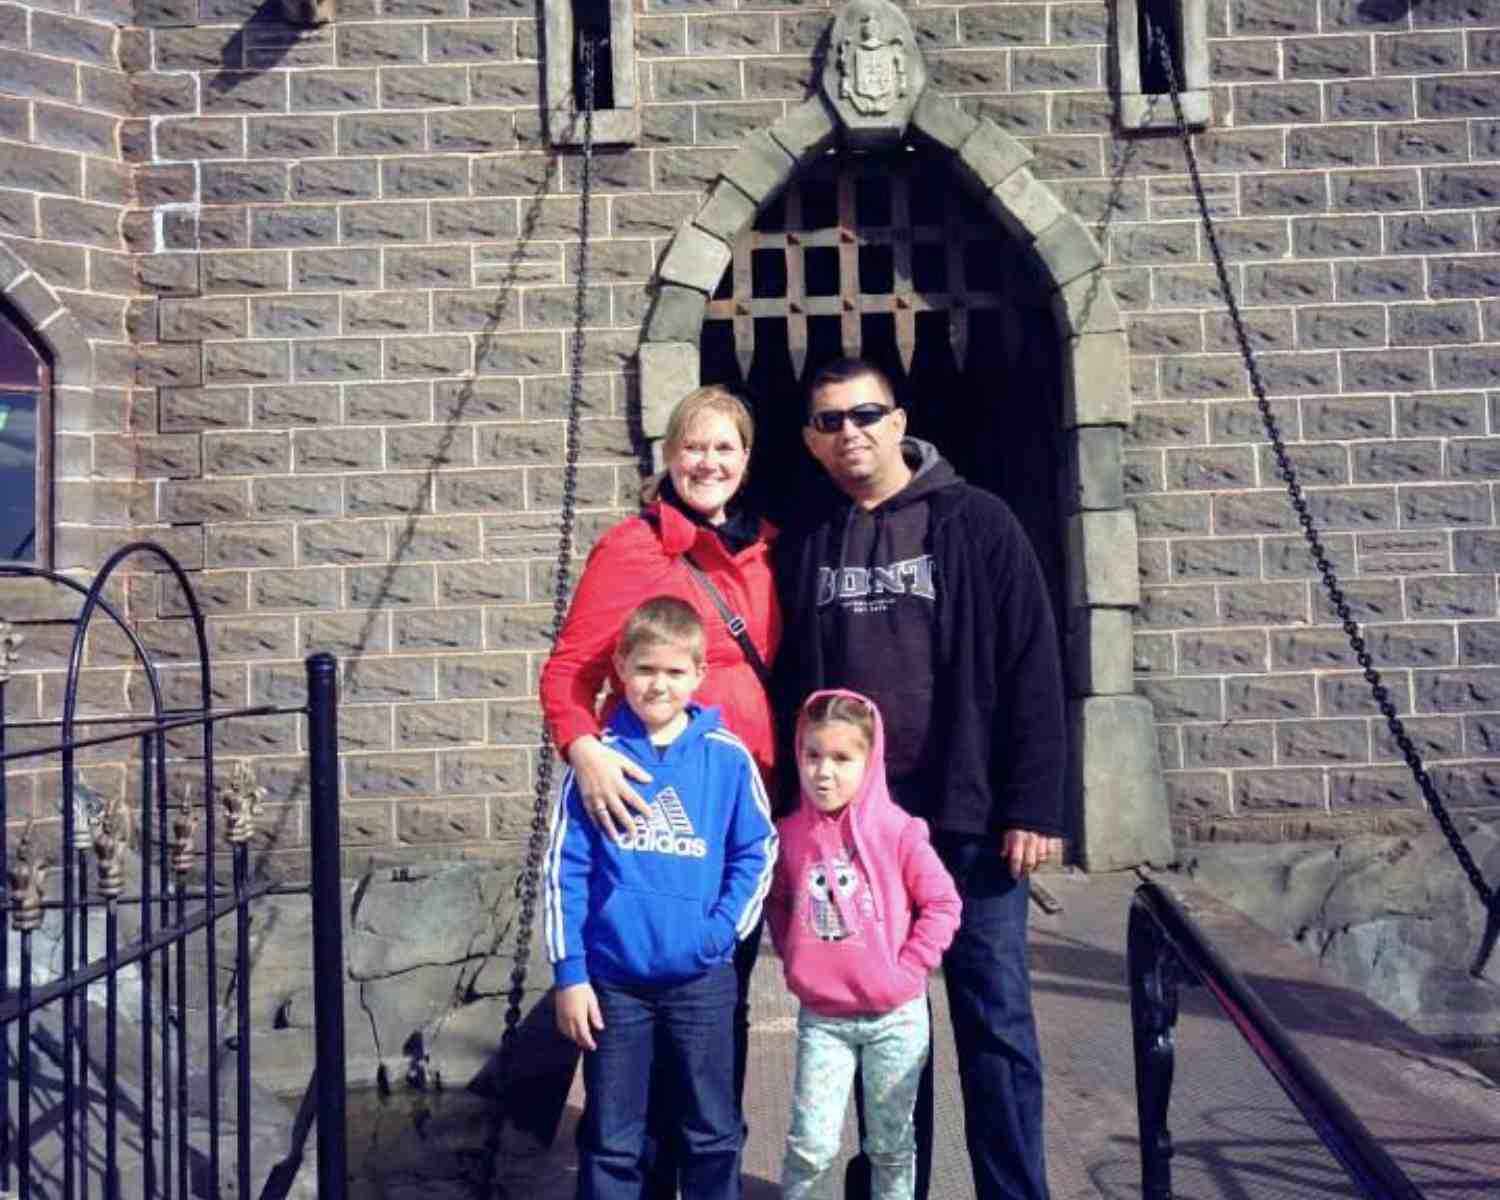 So much fun at Kryal Castle Ballarat with the whole family